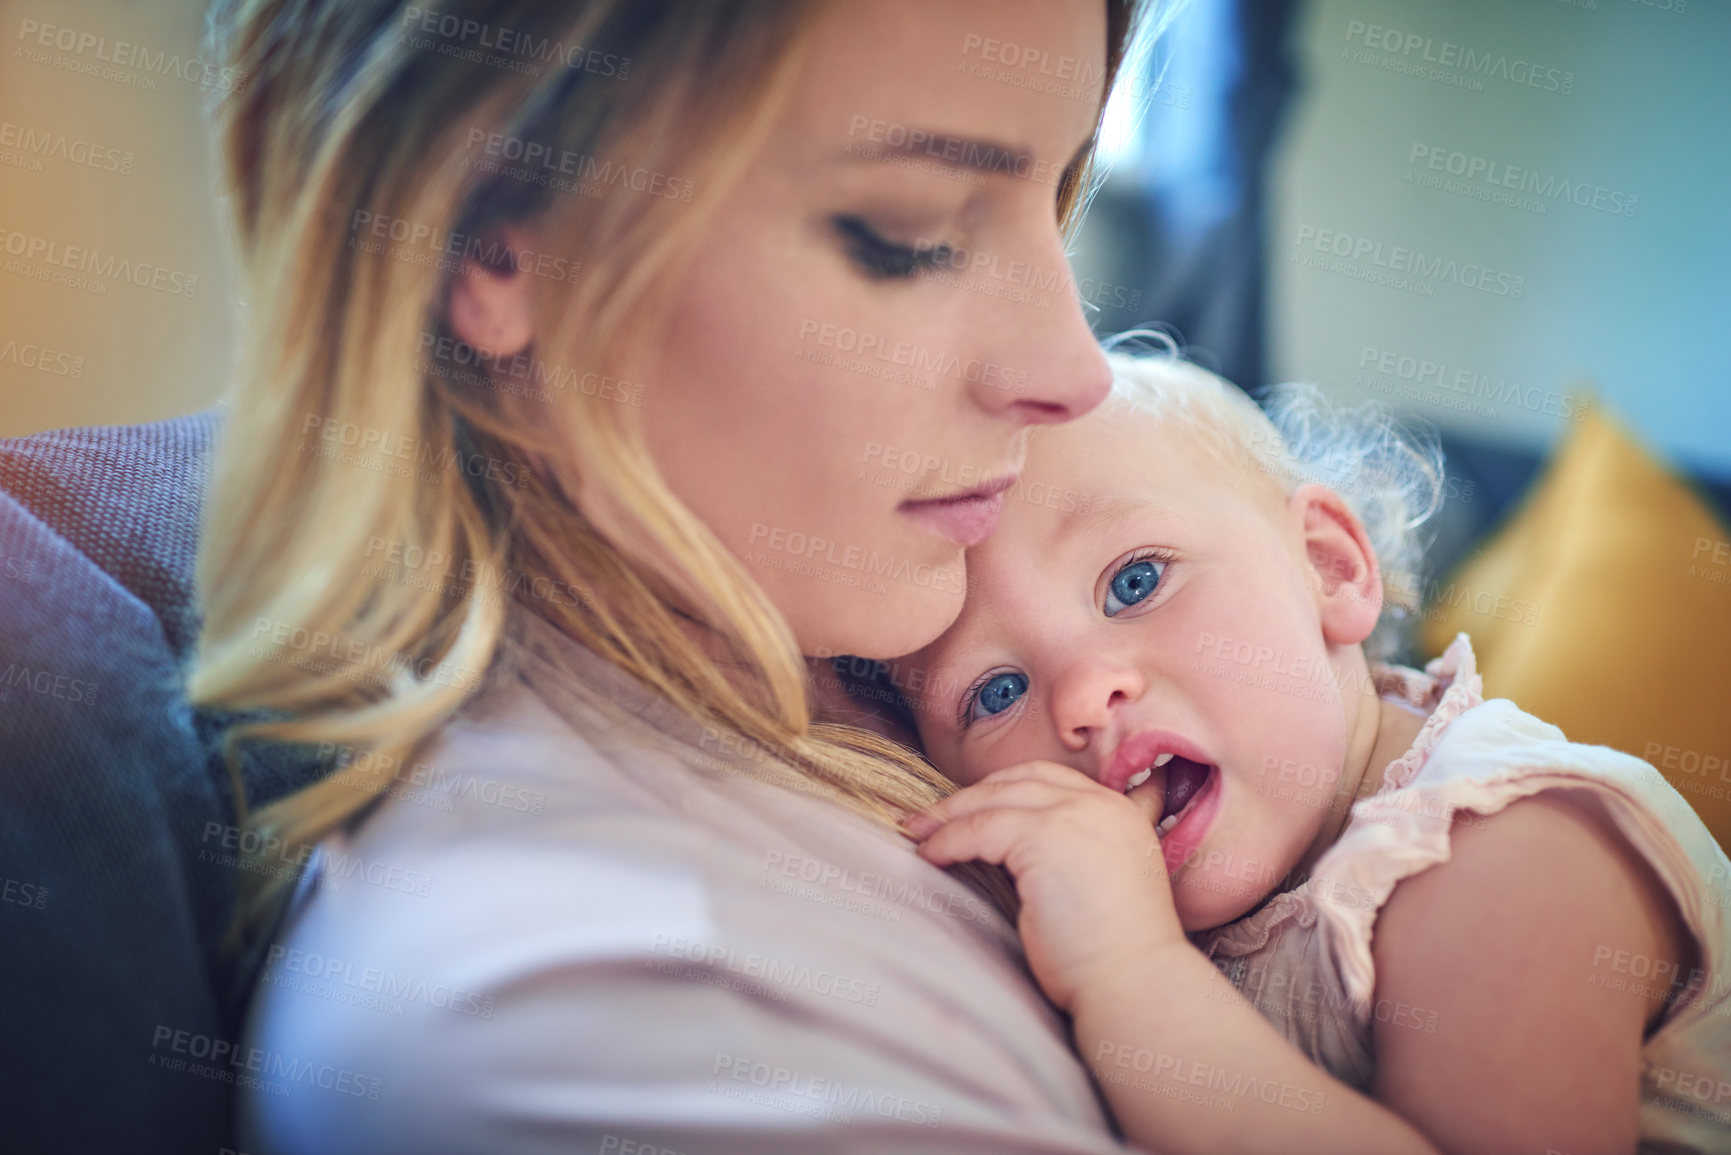 Buy stock photo Shot of an adorable baby girl bonding with her mother at home